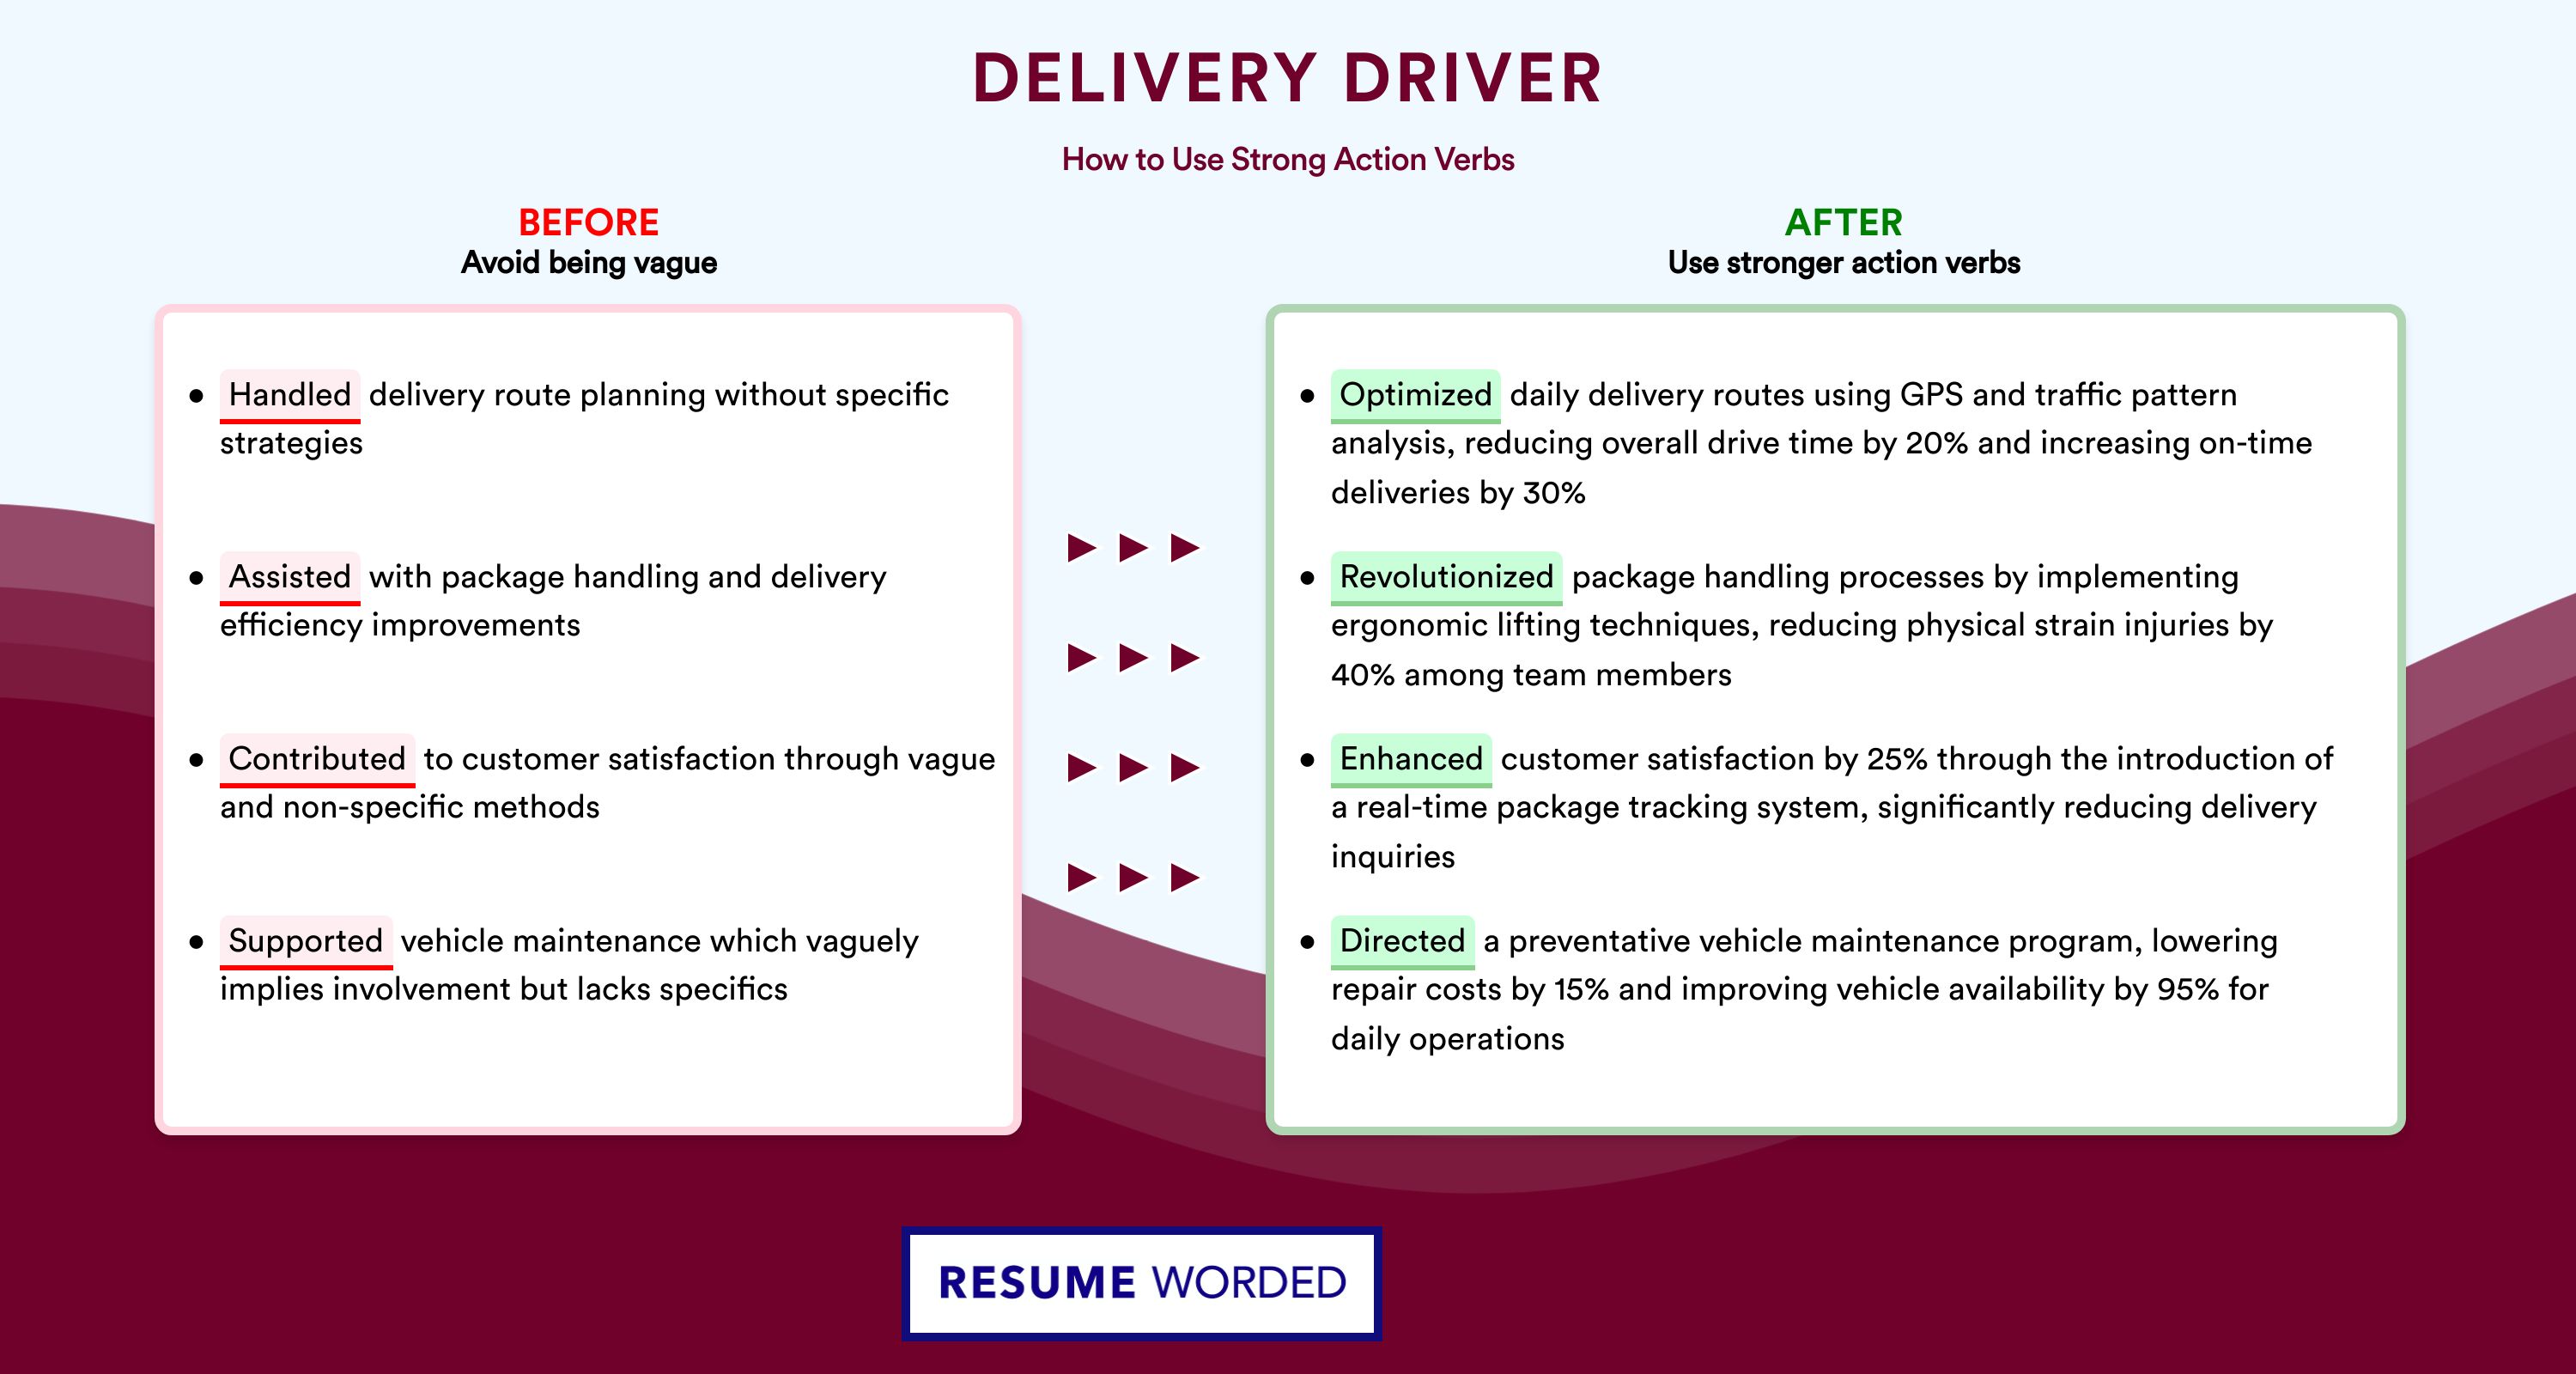 Action Verbs for Delivery Driver